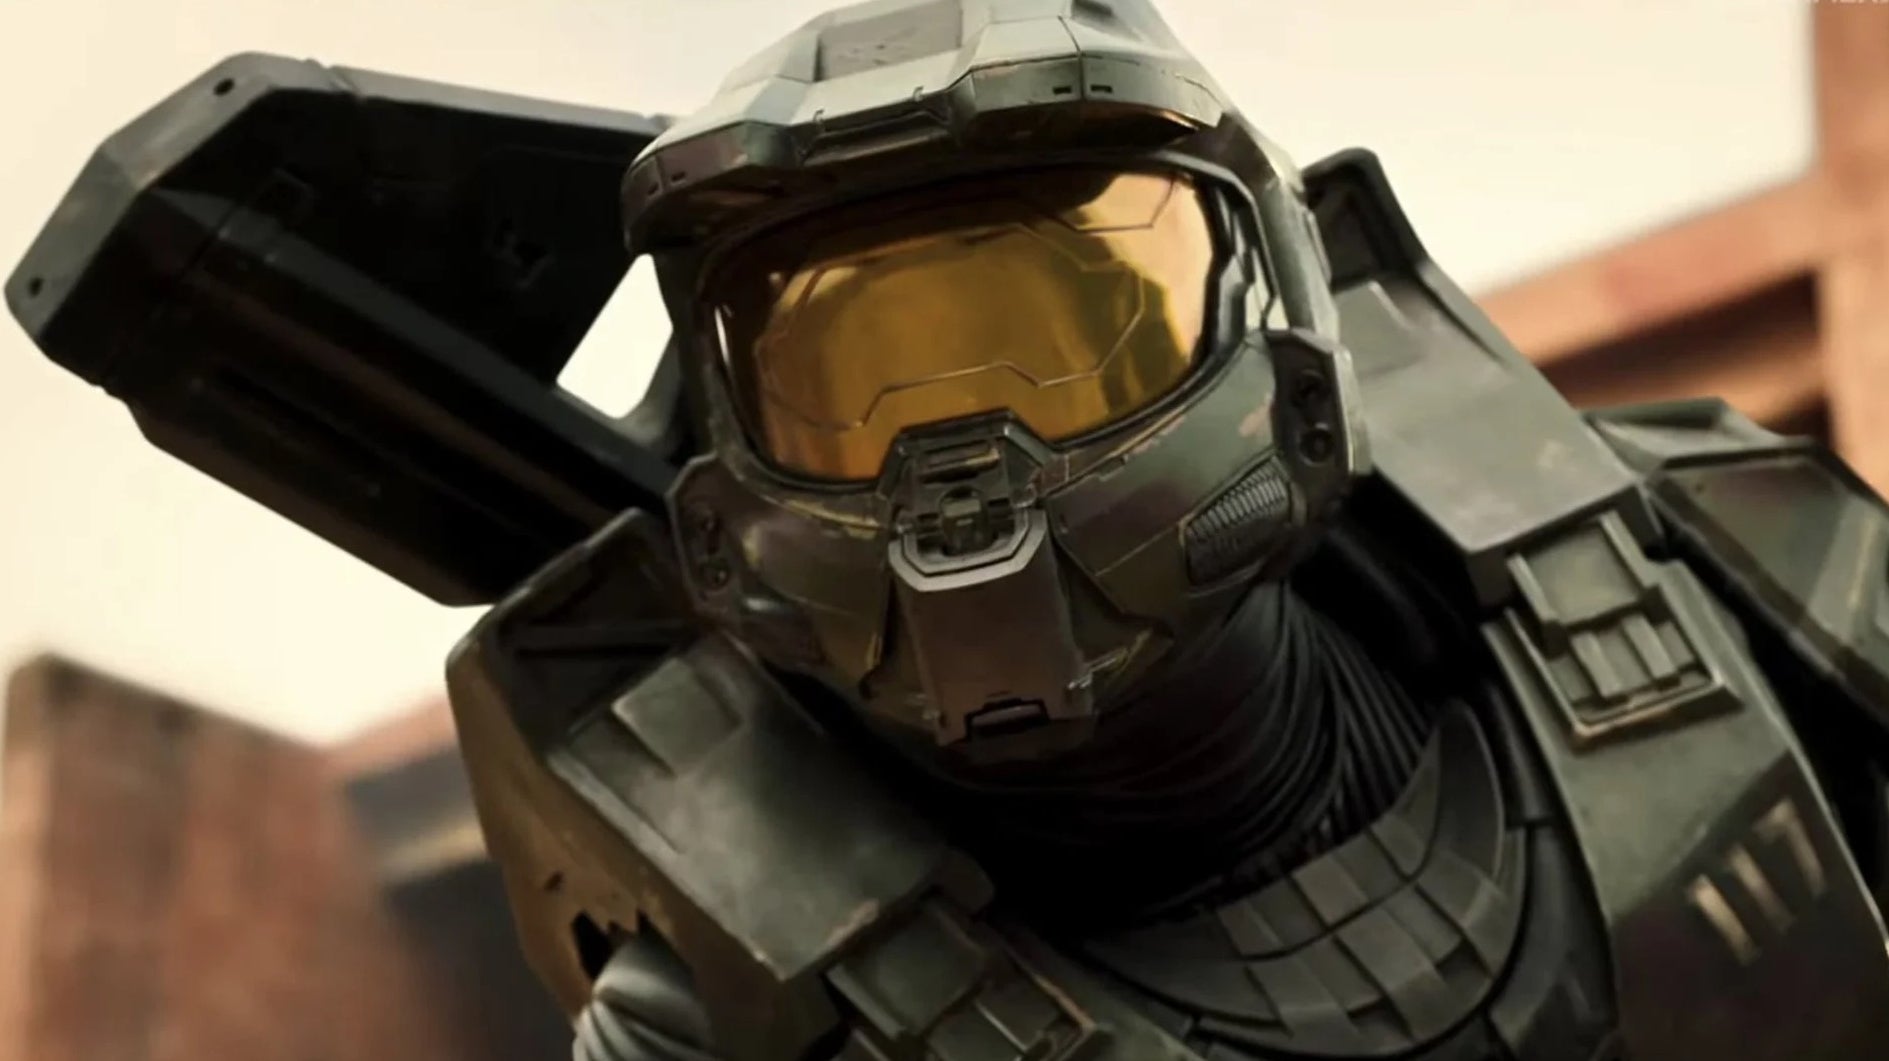 Image for Halo TV show sets a new viewership record for Paramount+